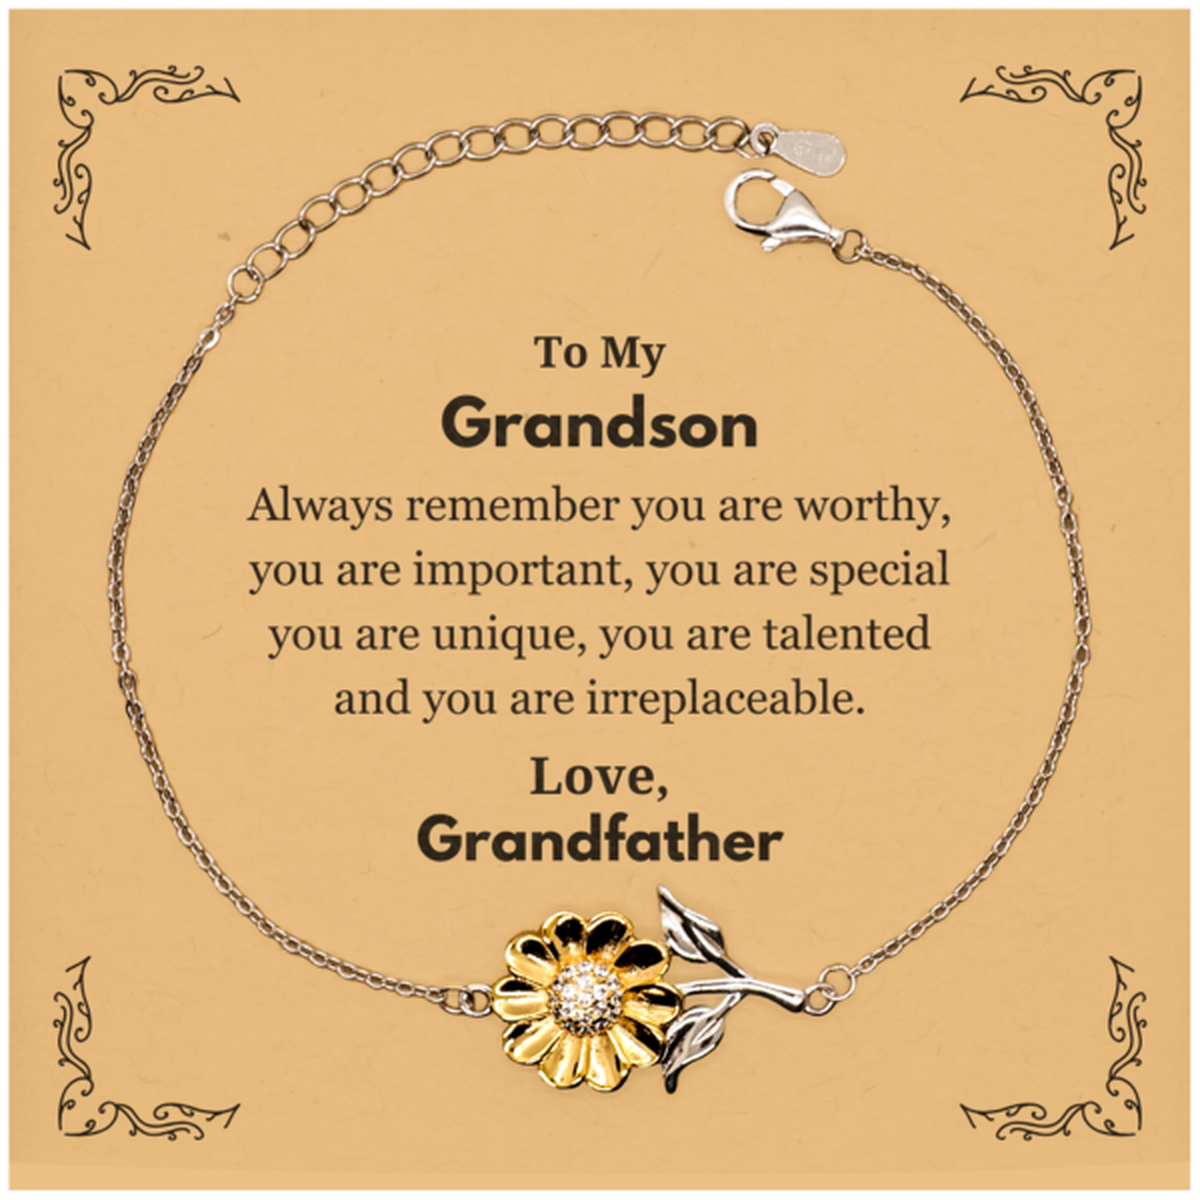 Grandson Birthday Gifts from Grandfather, Inspirational Sunflower Bracelet for Grandson Christmas Graduation Gifts for Grandson Always remember you are worthy, you are important. Love, Grandfather